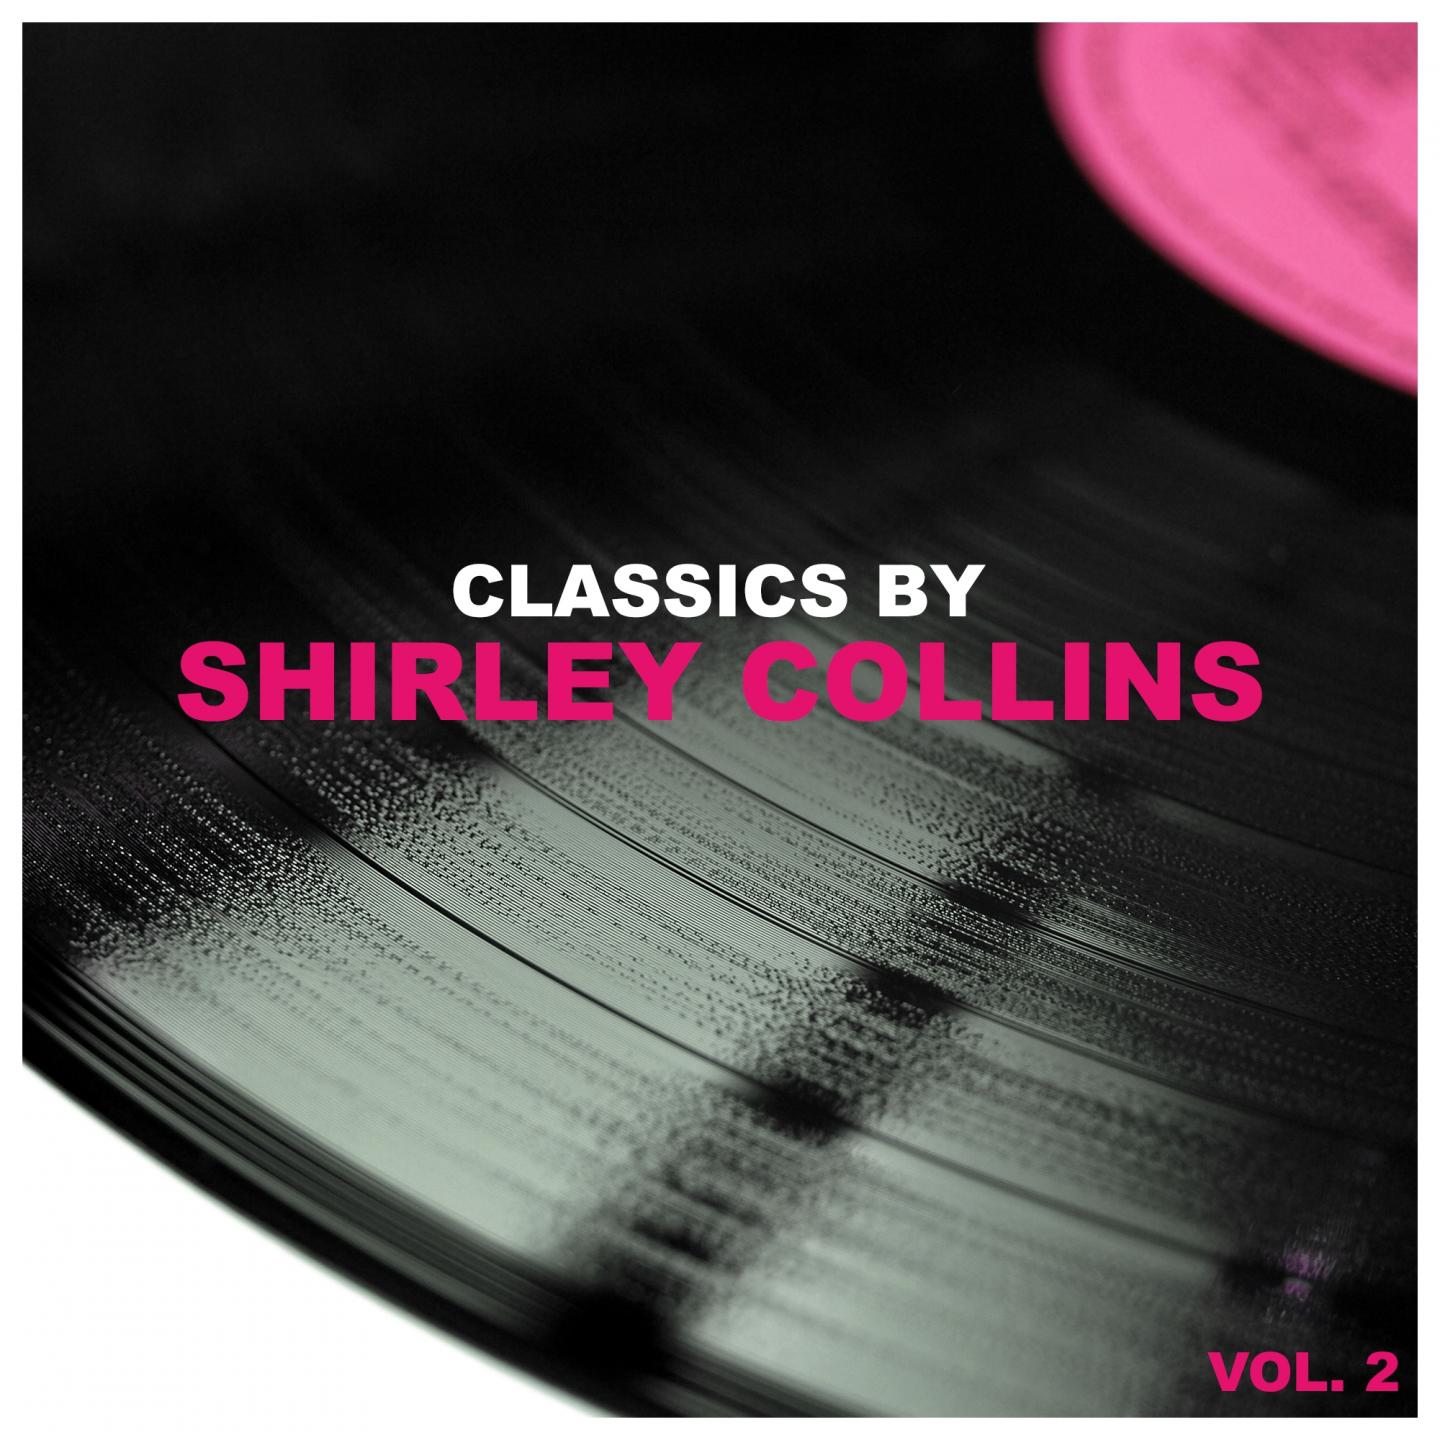 Classics by Shirley Collins, Vol. 2